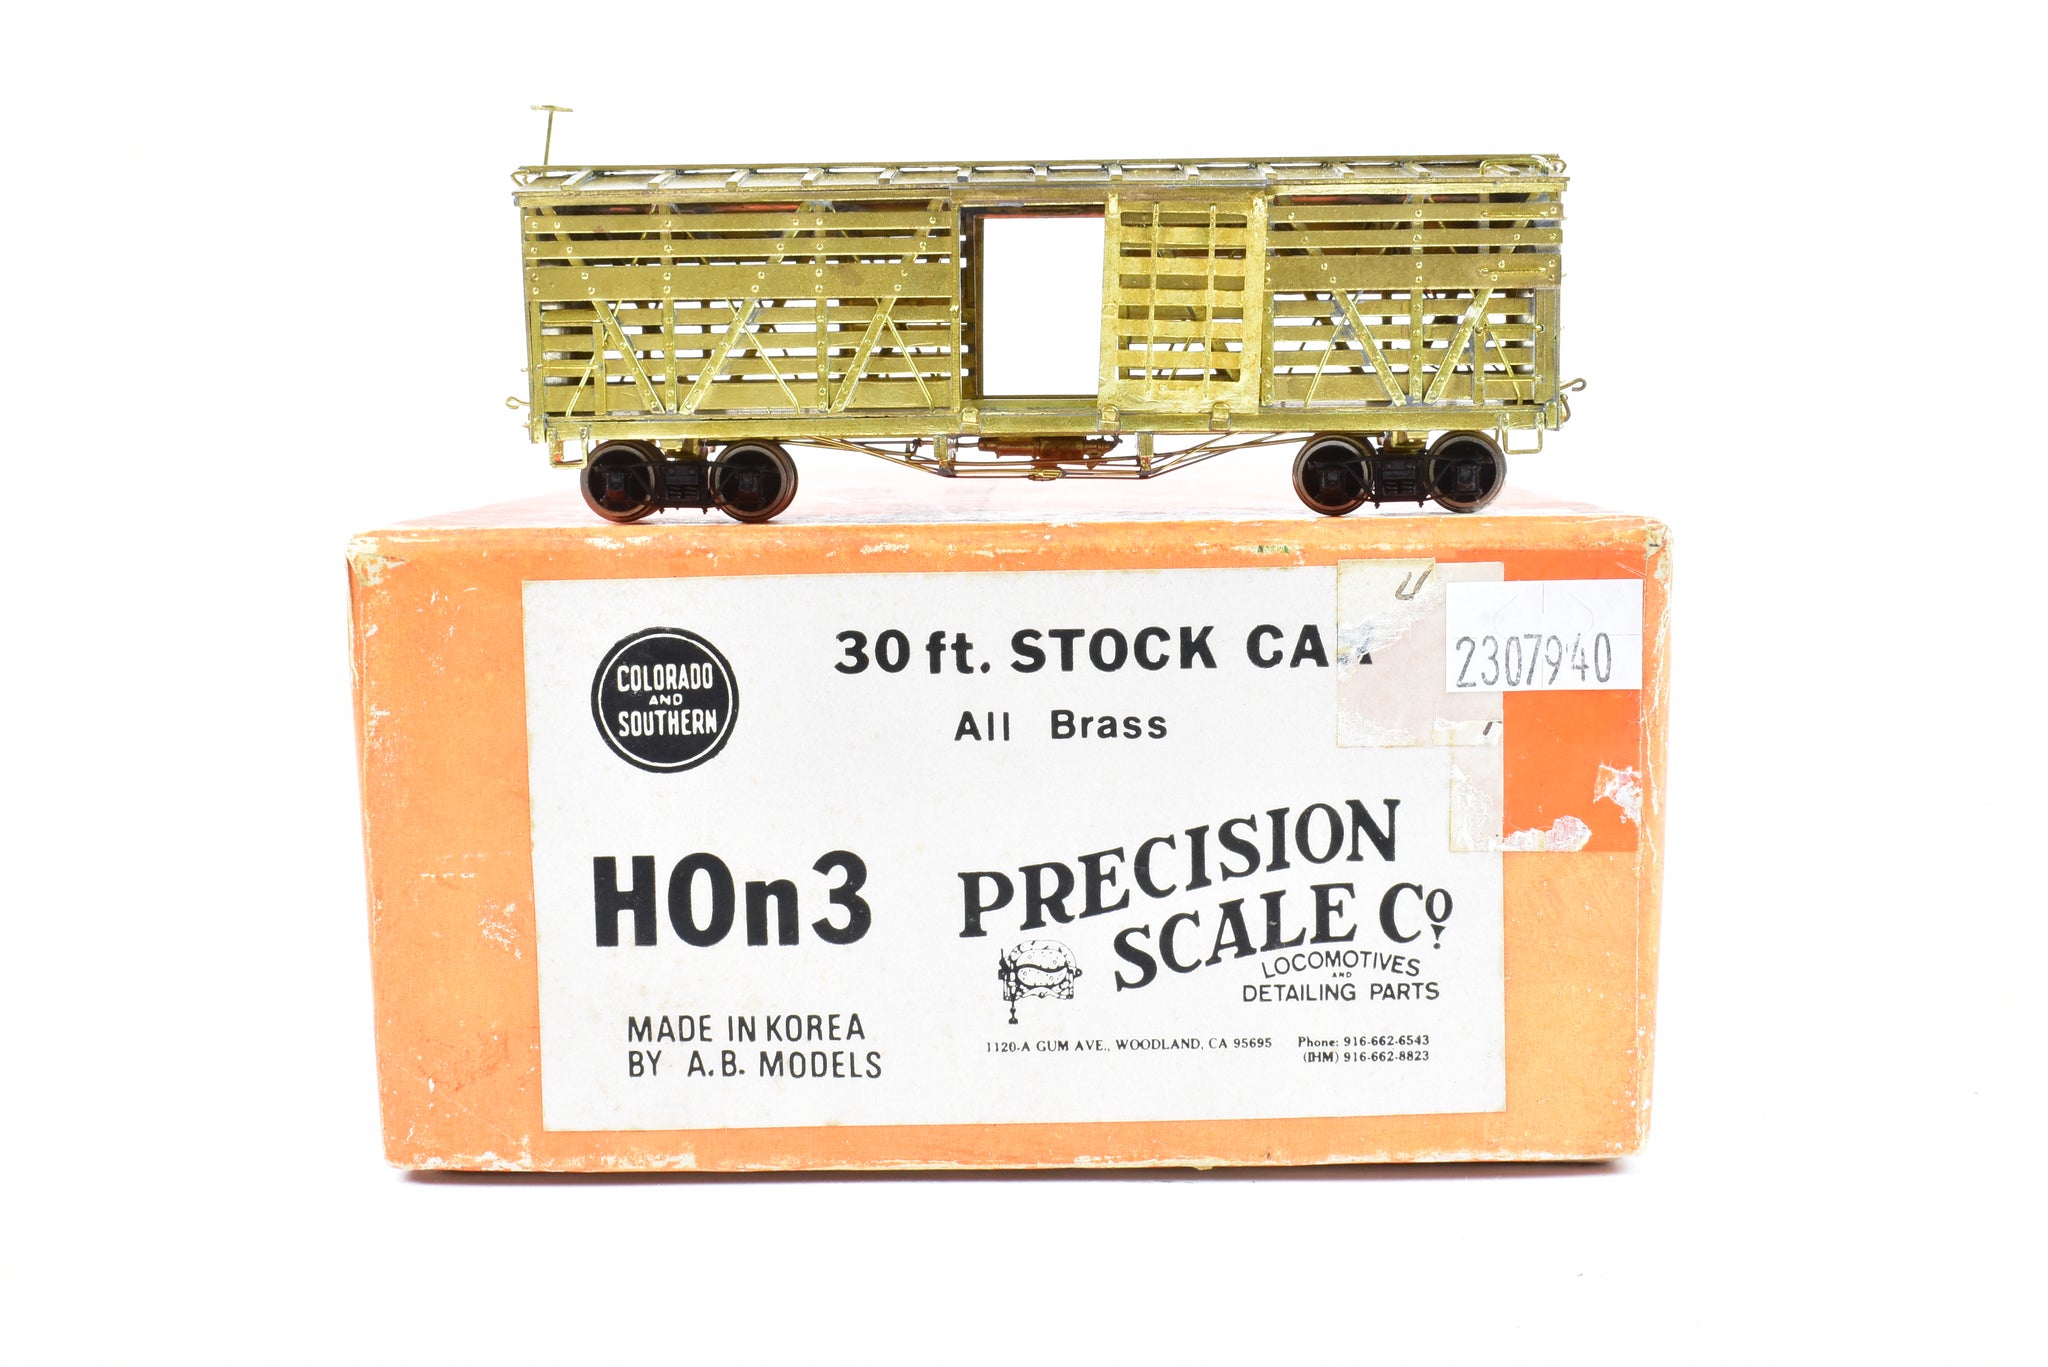 HOn3 Brass PSC - Precision Scale Co. C&S - Colorado & Southern or 